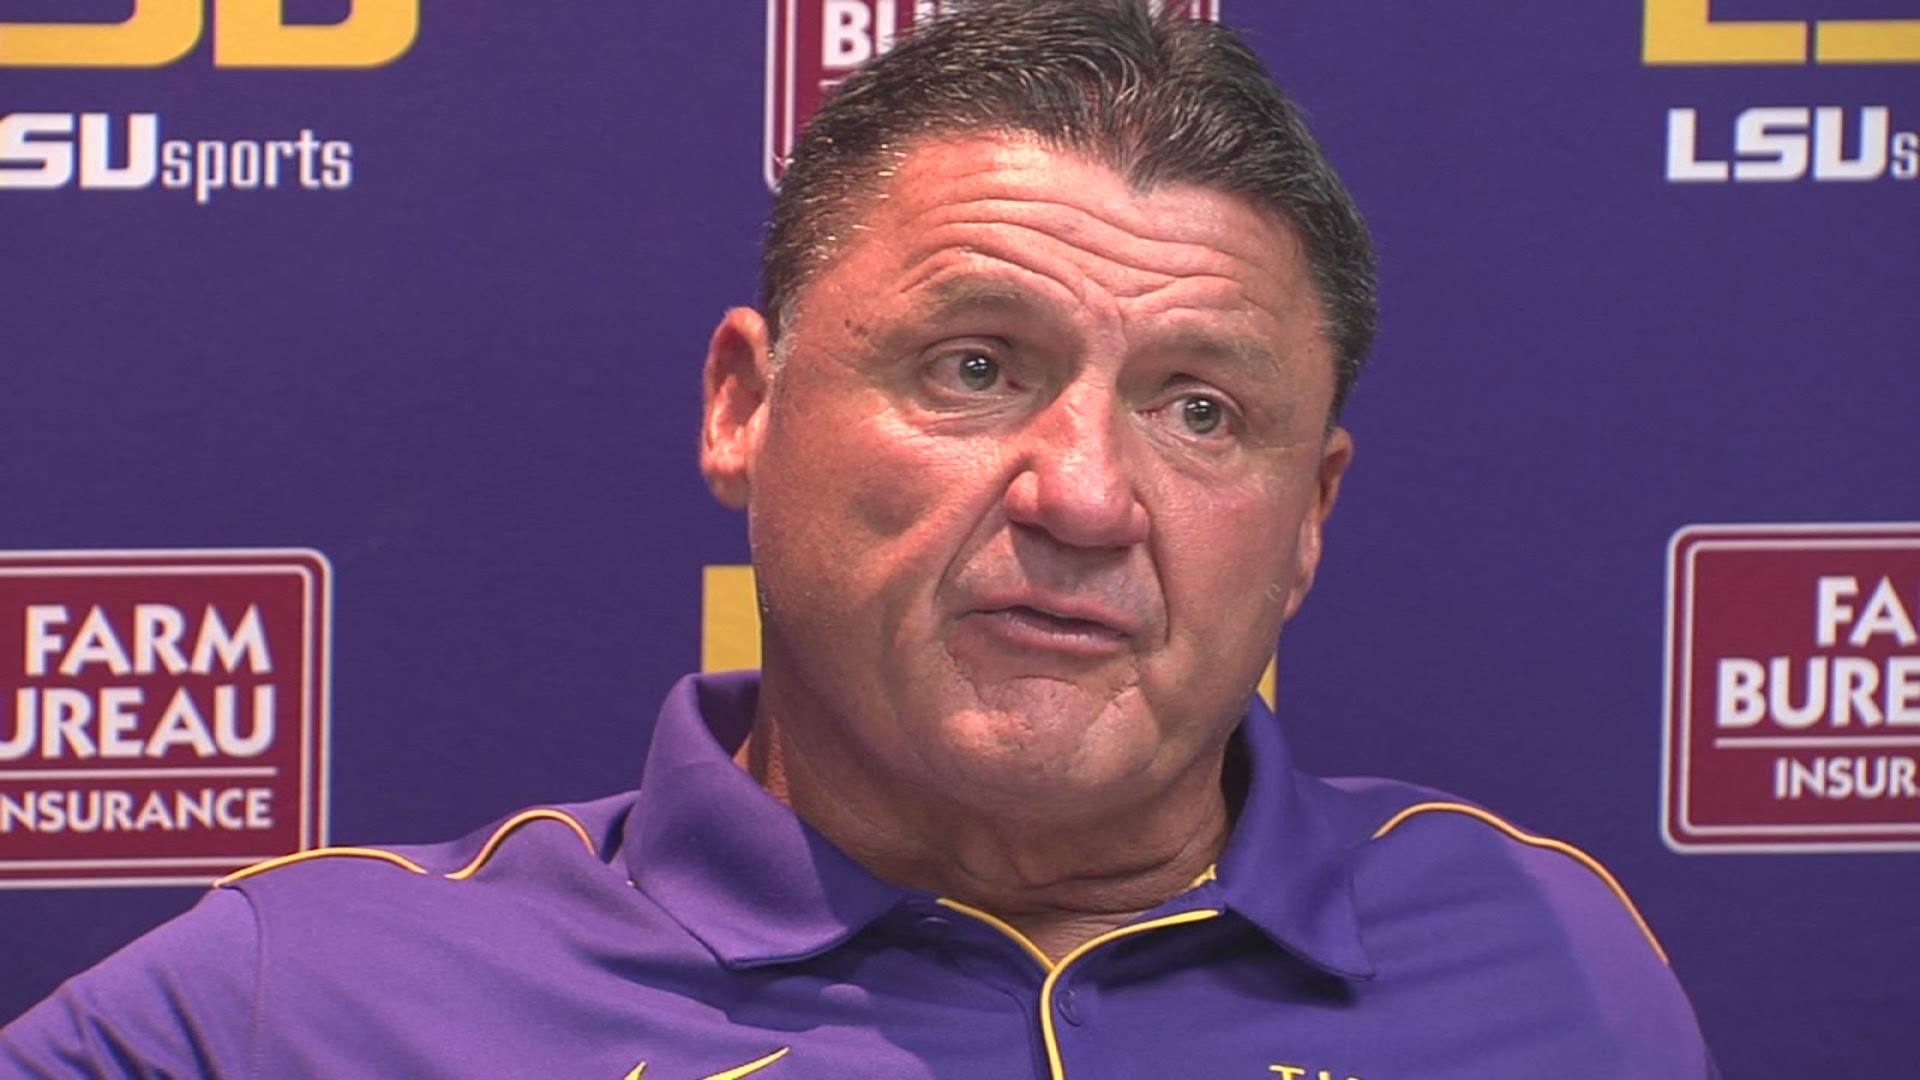 LSU's offense hummed against the University of Texas - throwing for 471 yards and four touchdowns. Head coach Ed Orgeron and Quarterback Joe Burrow talked about the air show and what's to come.